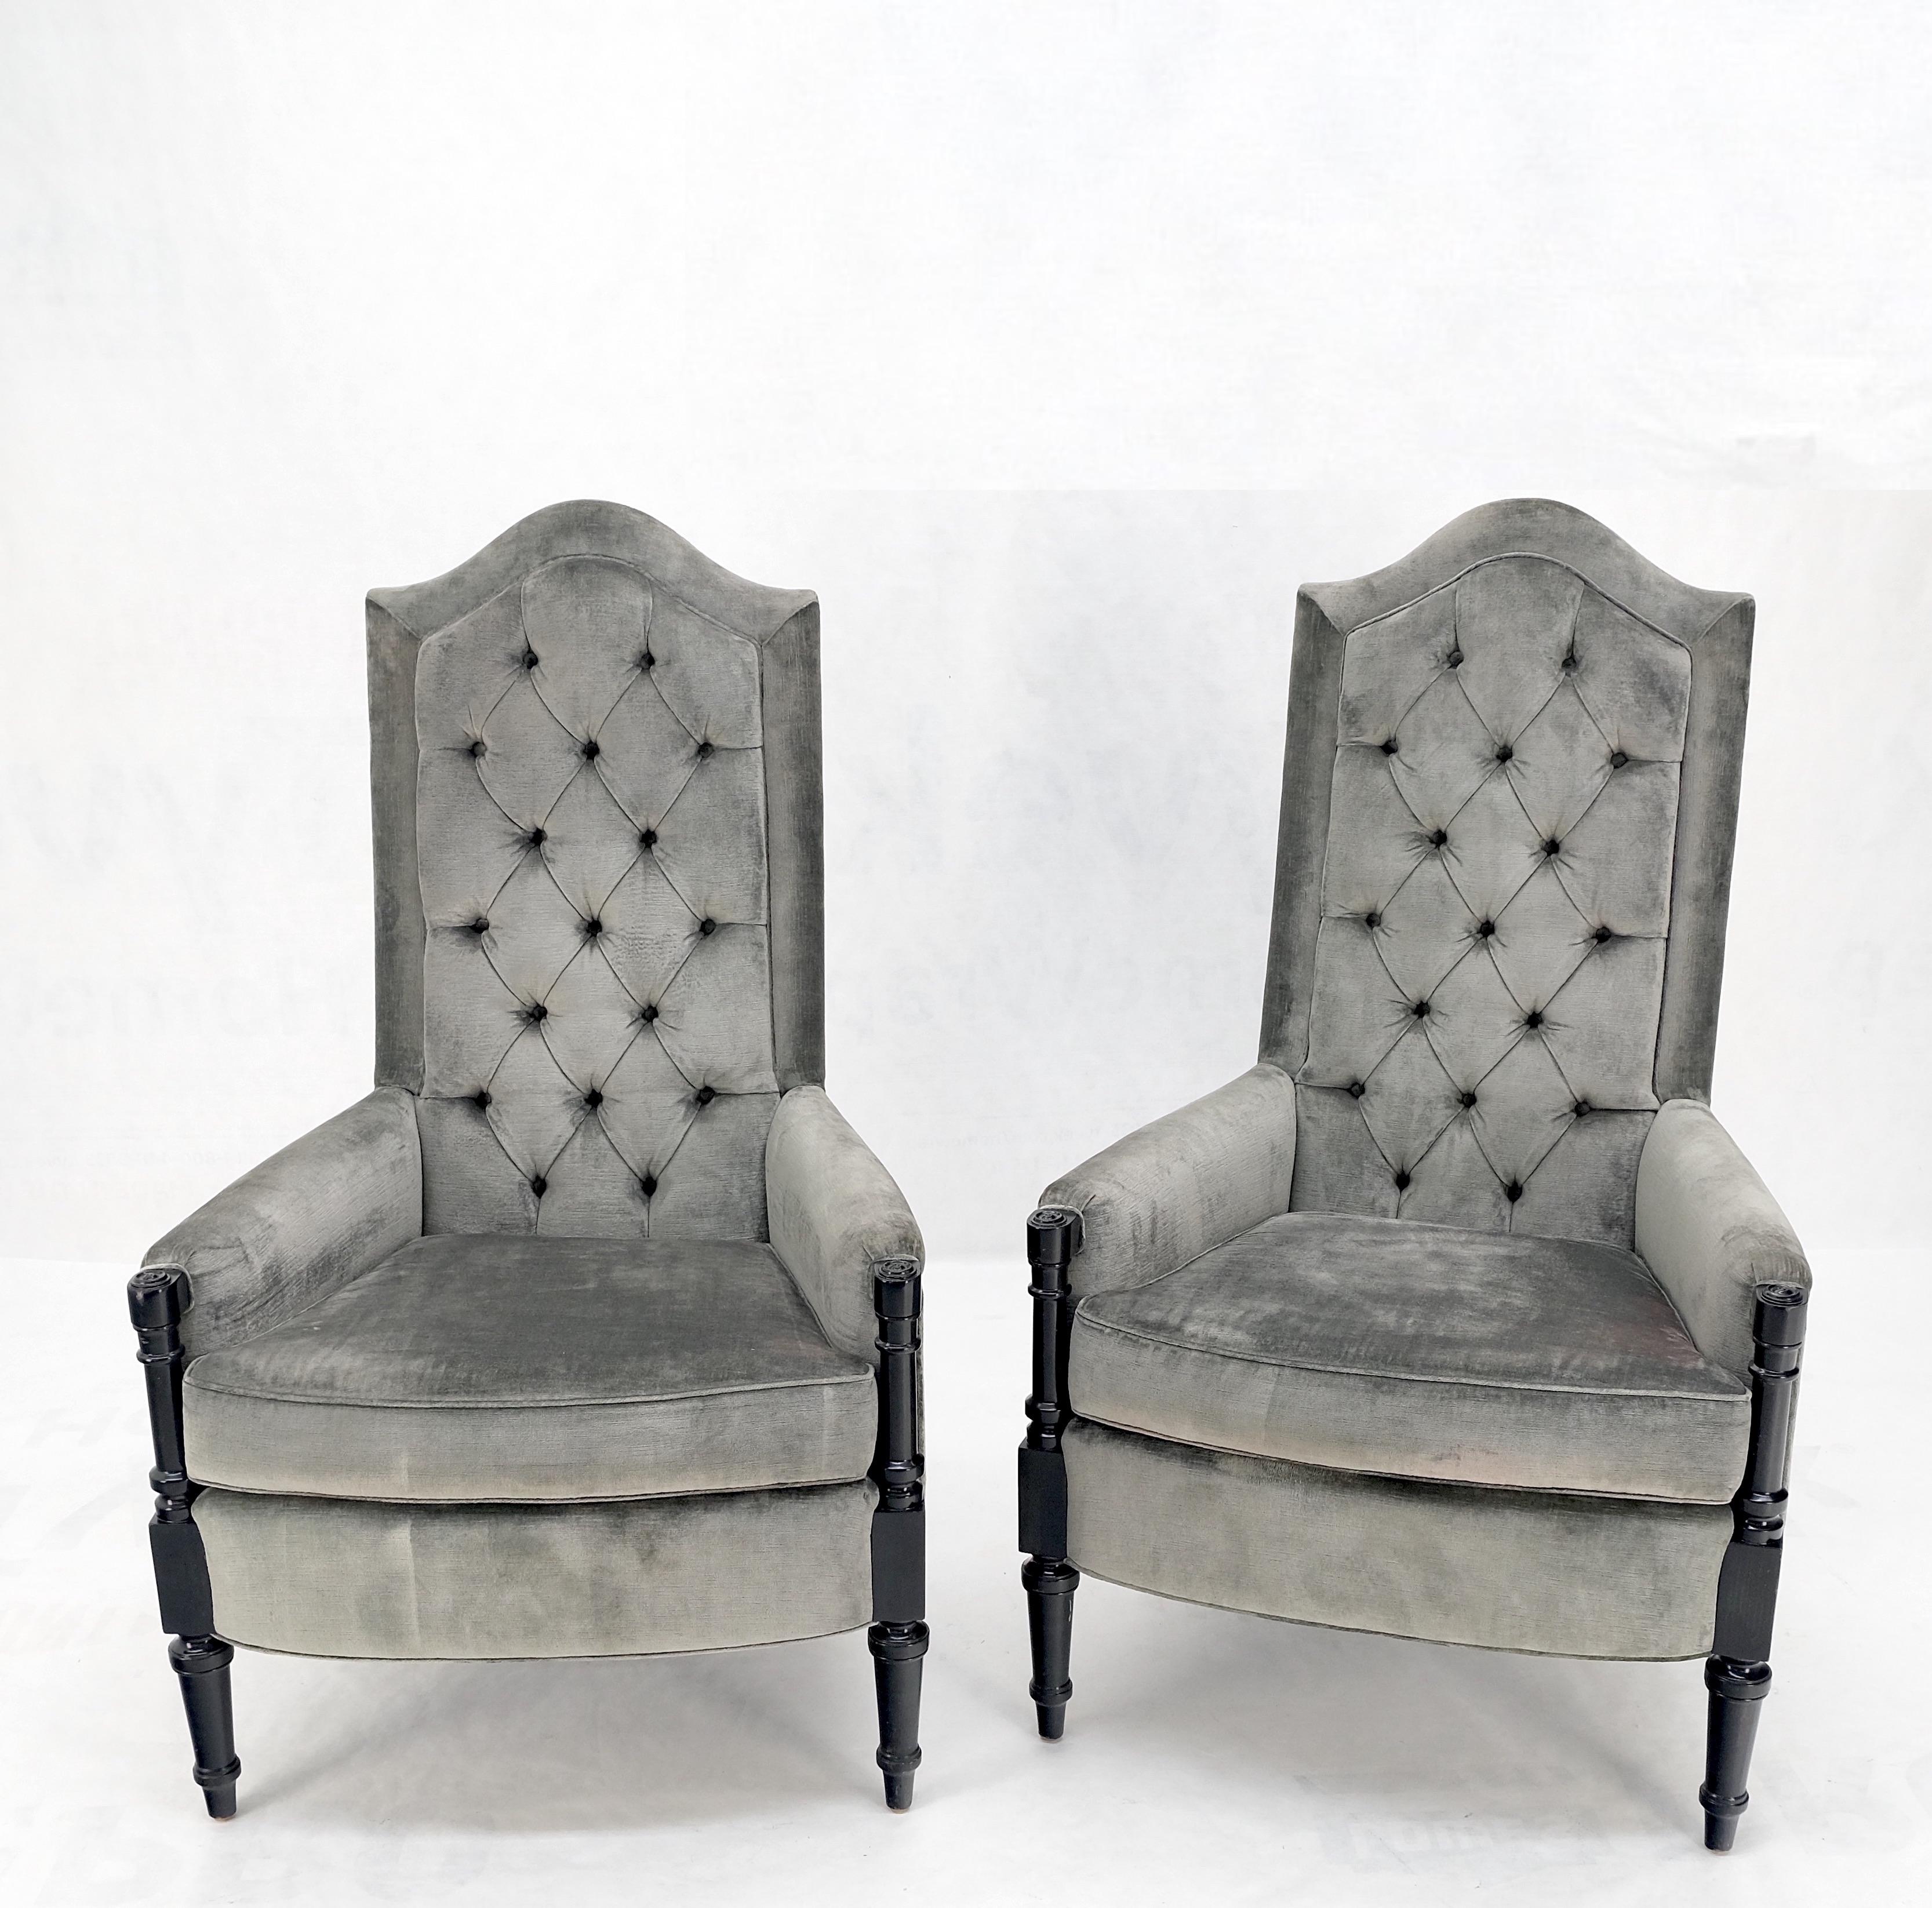 Upholstery Pair of Tall Tufted Backs Black Lacquer Frames Decorative Arm Chairs Thrones For Sale